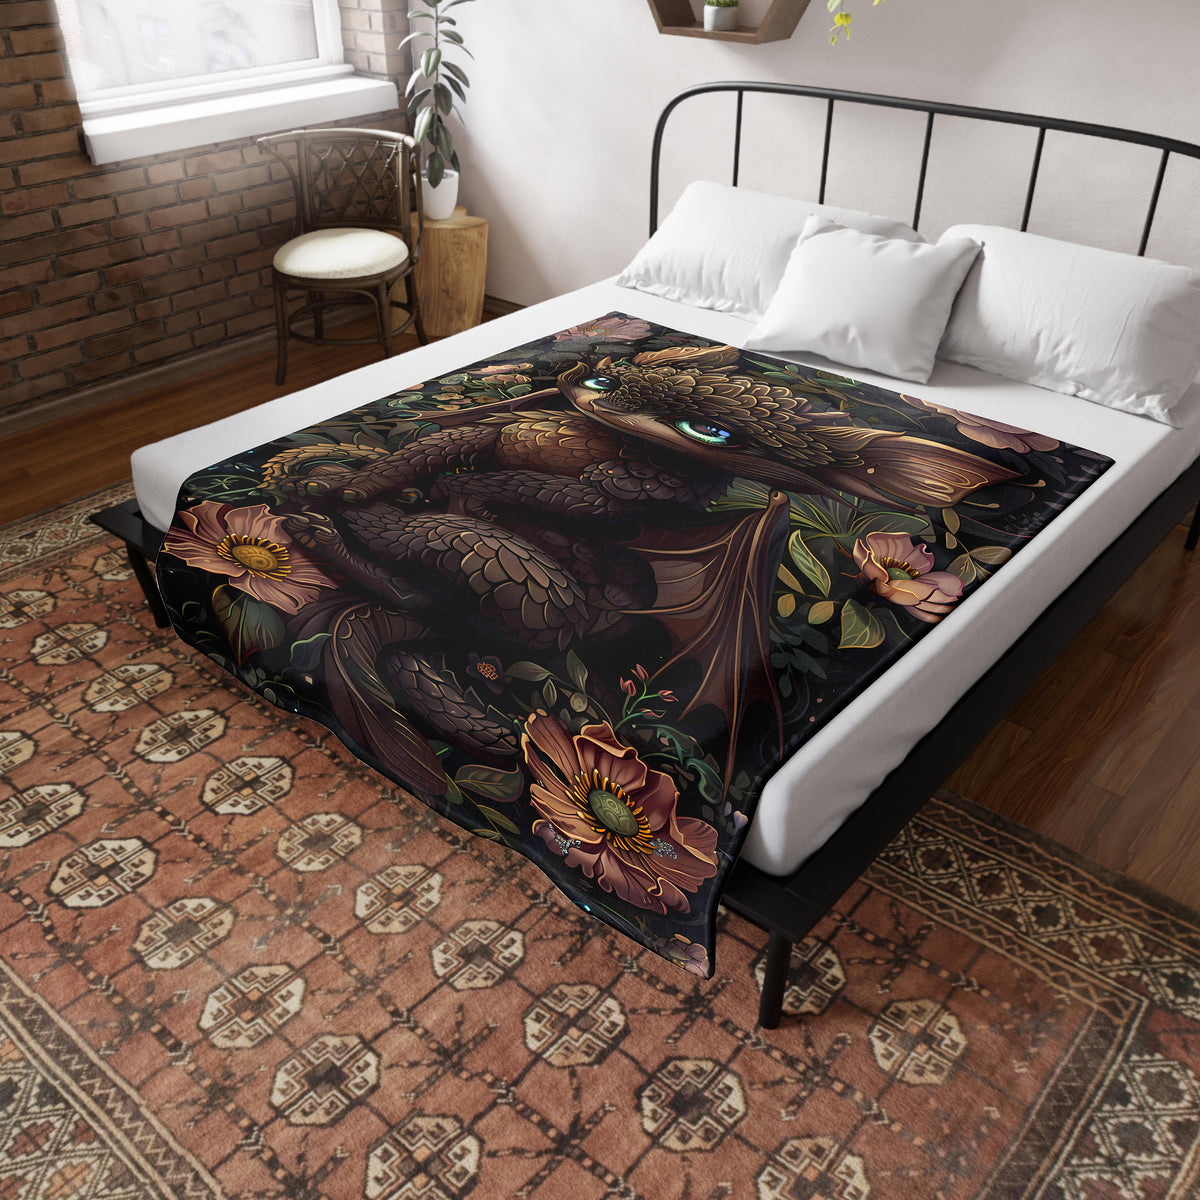 a bed with a dragon and flowers on it